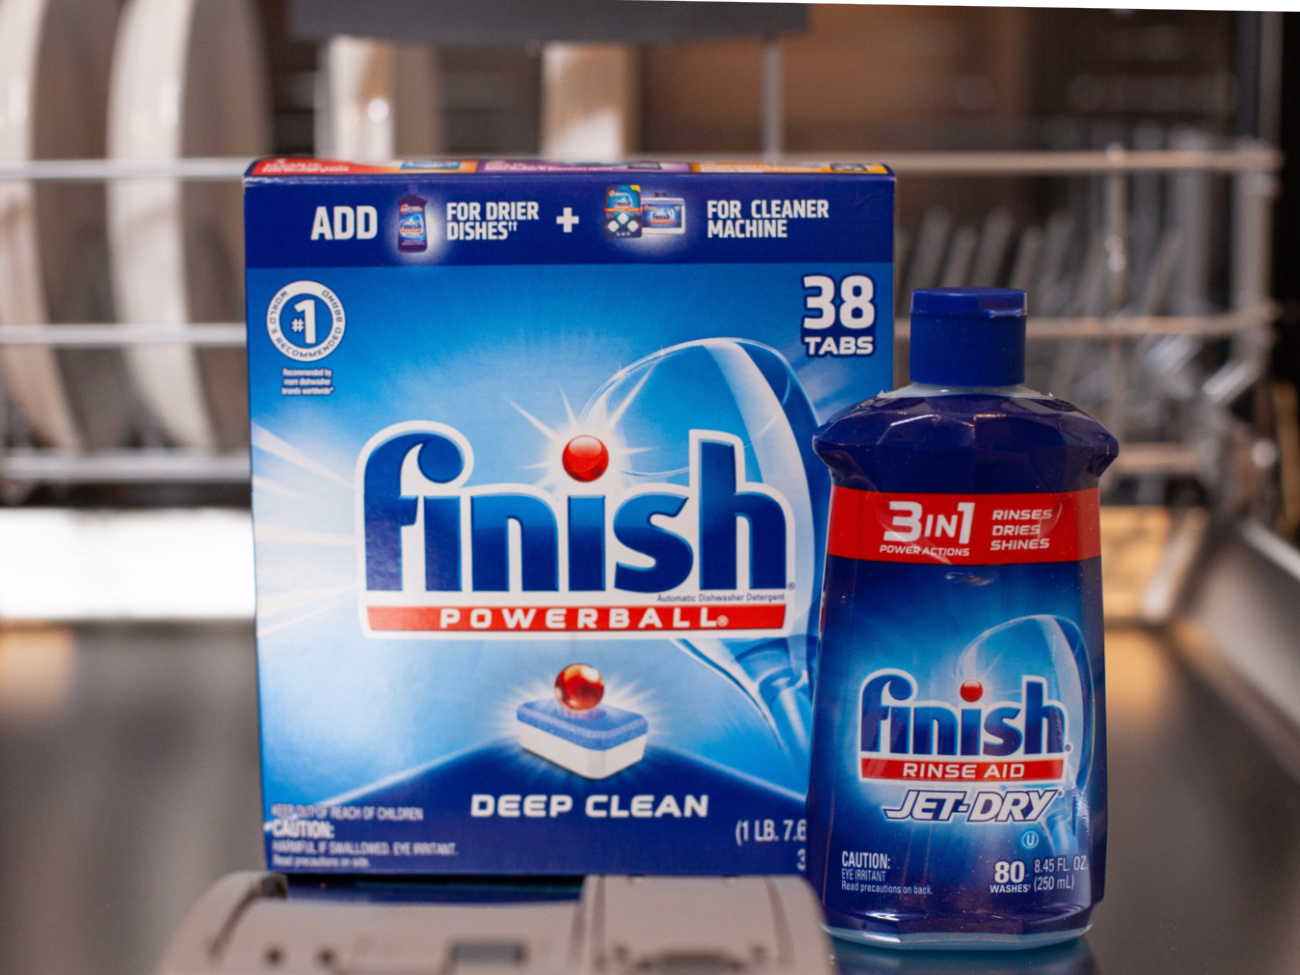 Finish Jet Dry Or Quantum Dishwasher Detergent As Low As $1.19 At Kroger